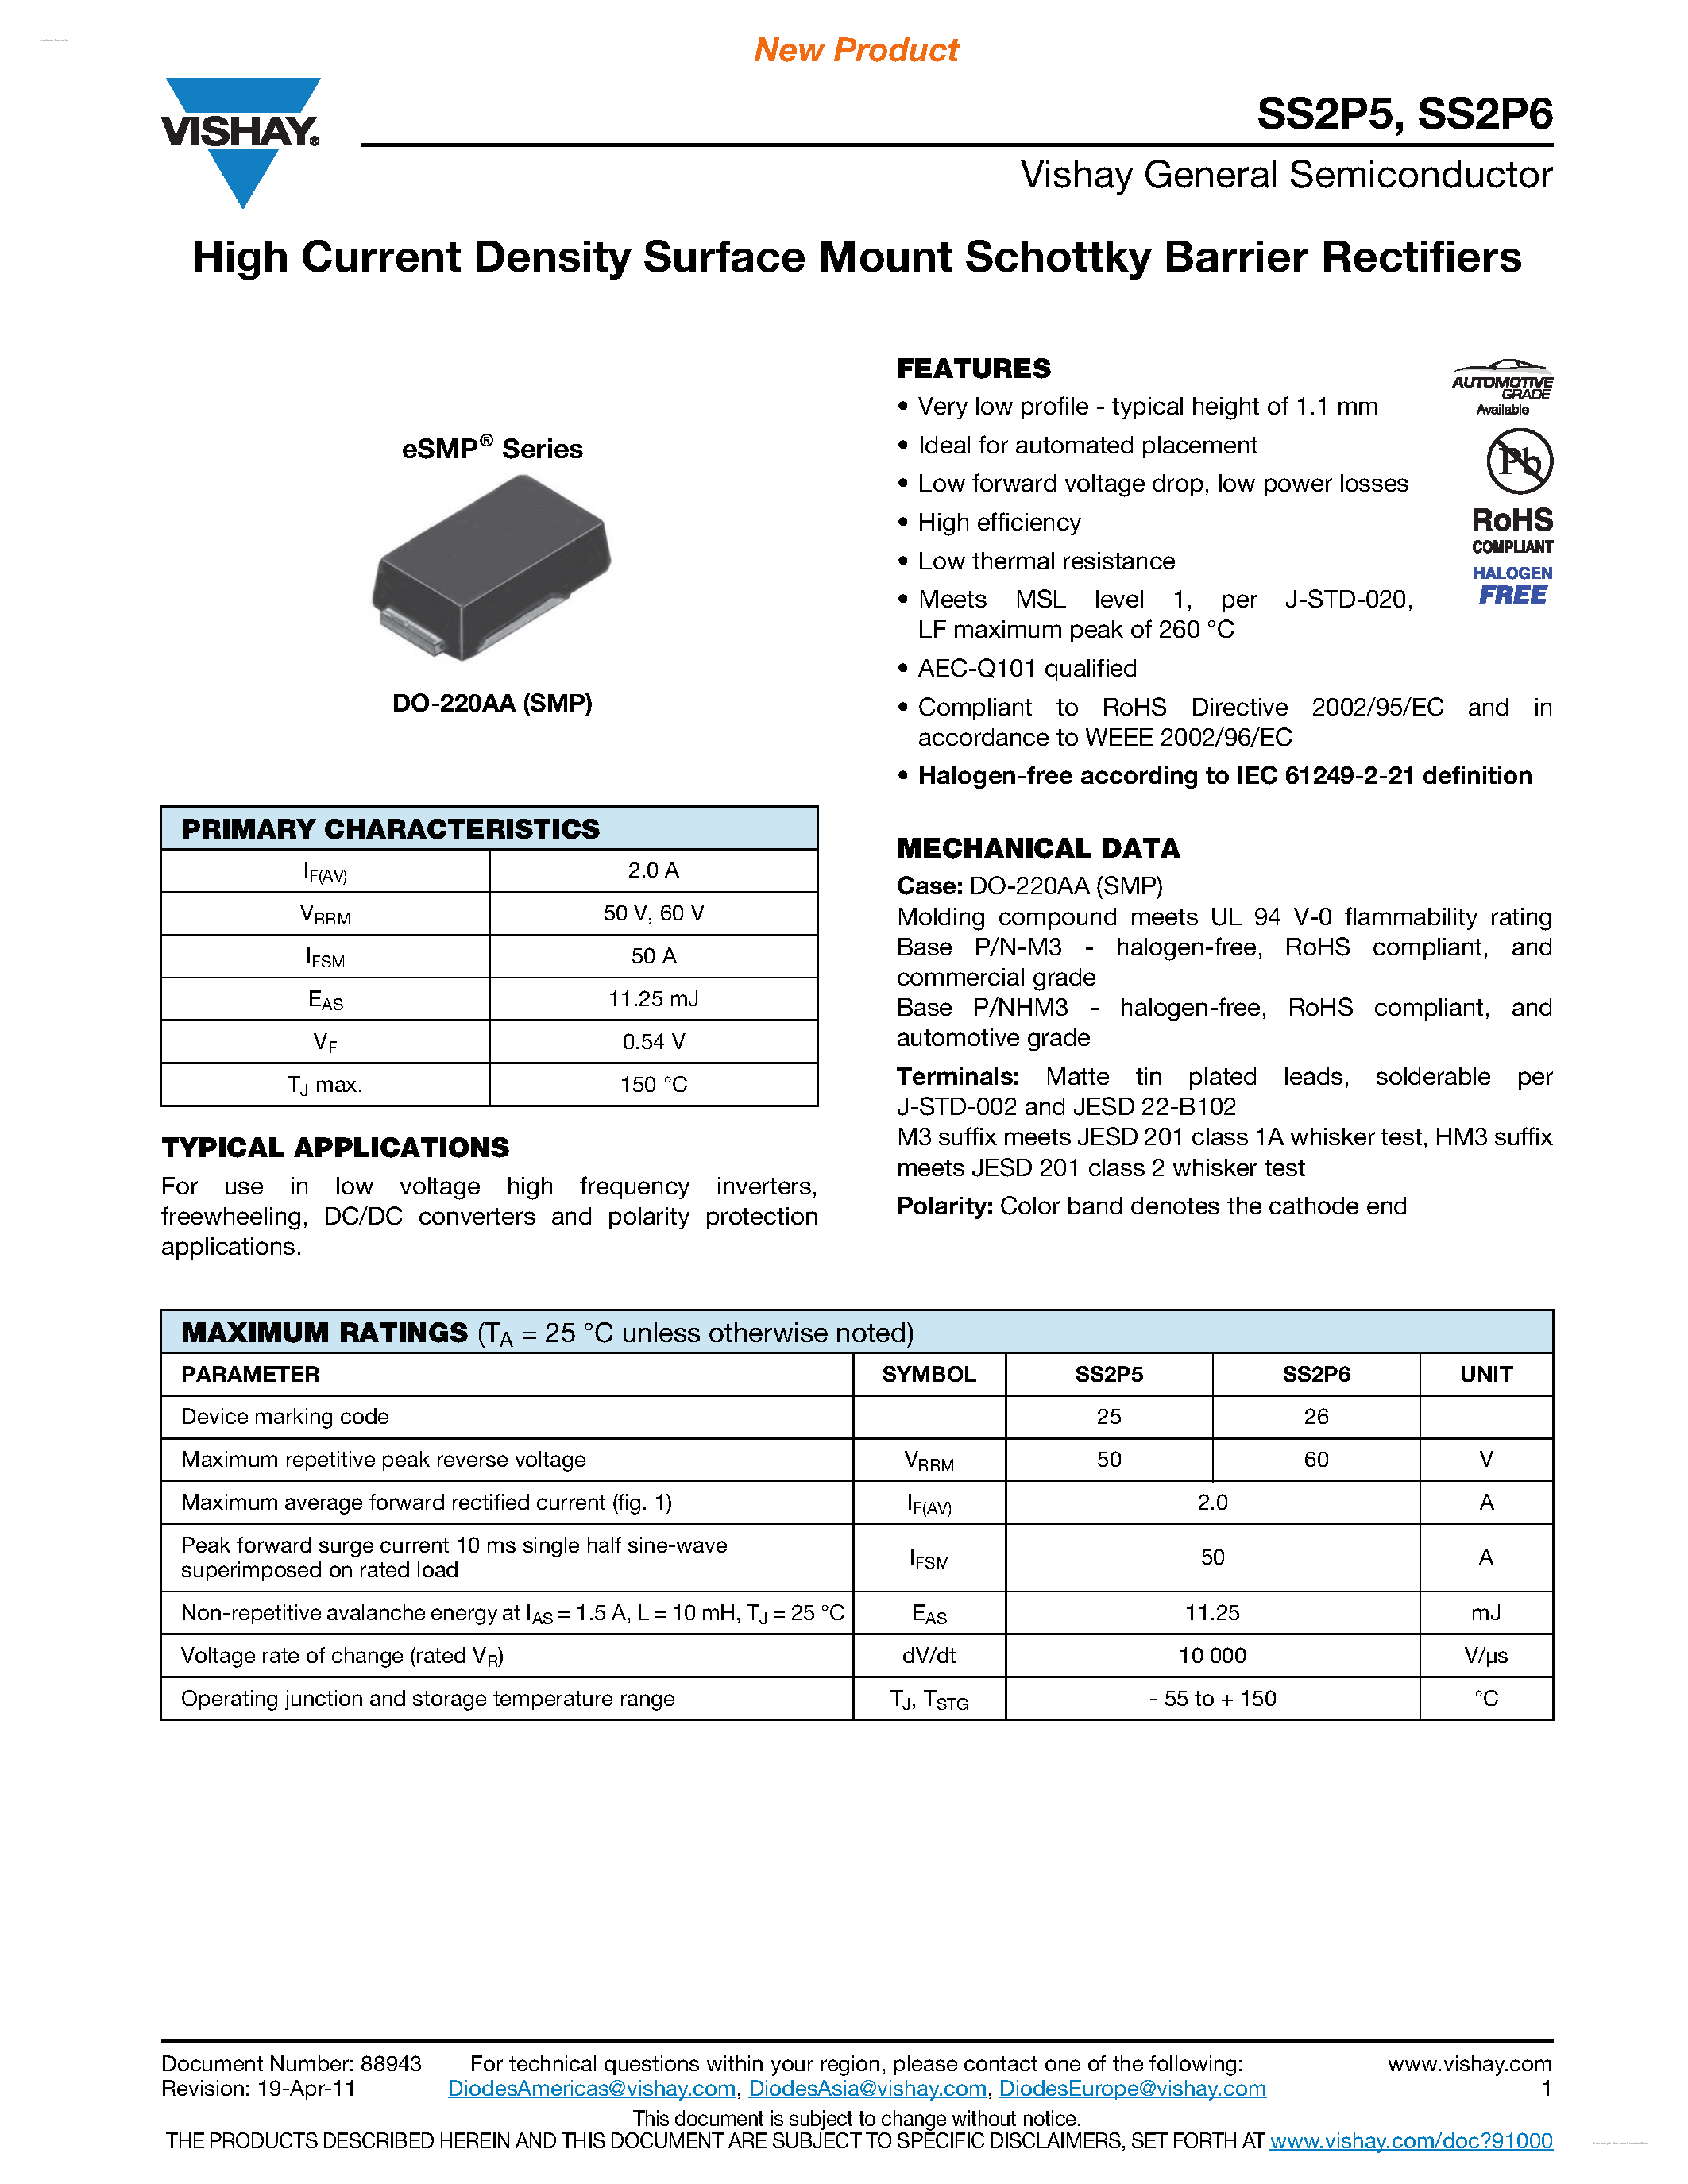 Datasheet SS2P5 - (SS2P5 / SS2P6) High Current Density Surface Mount Schottky Barrier Rectifiers page 1